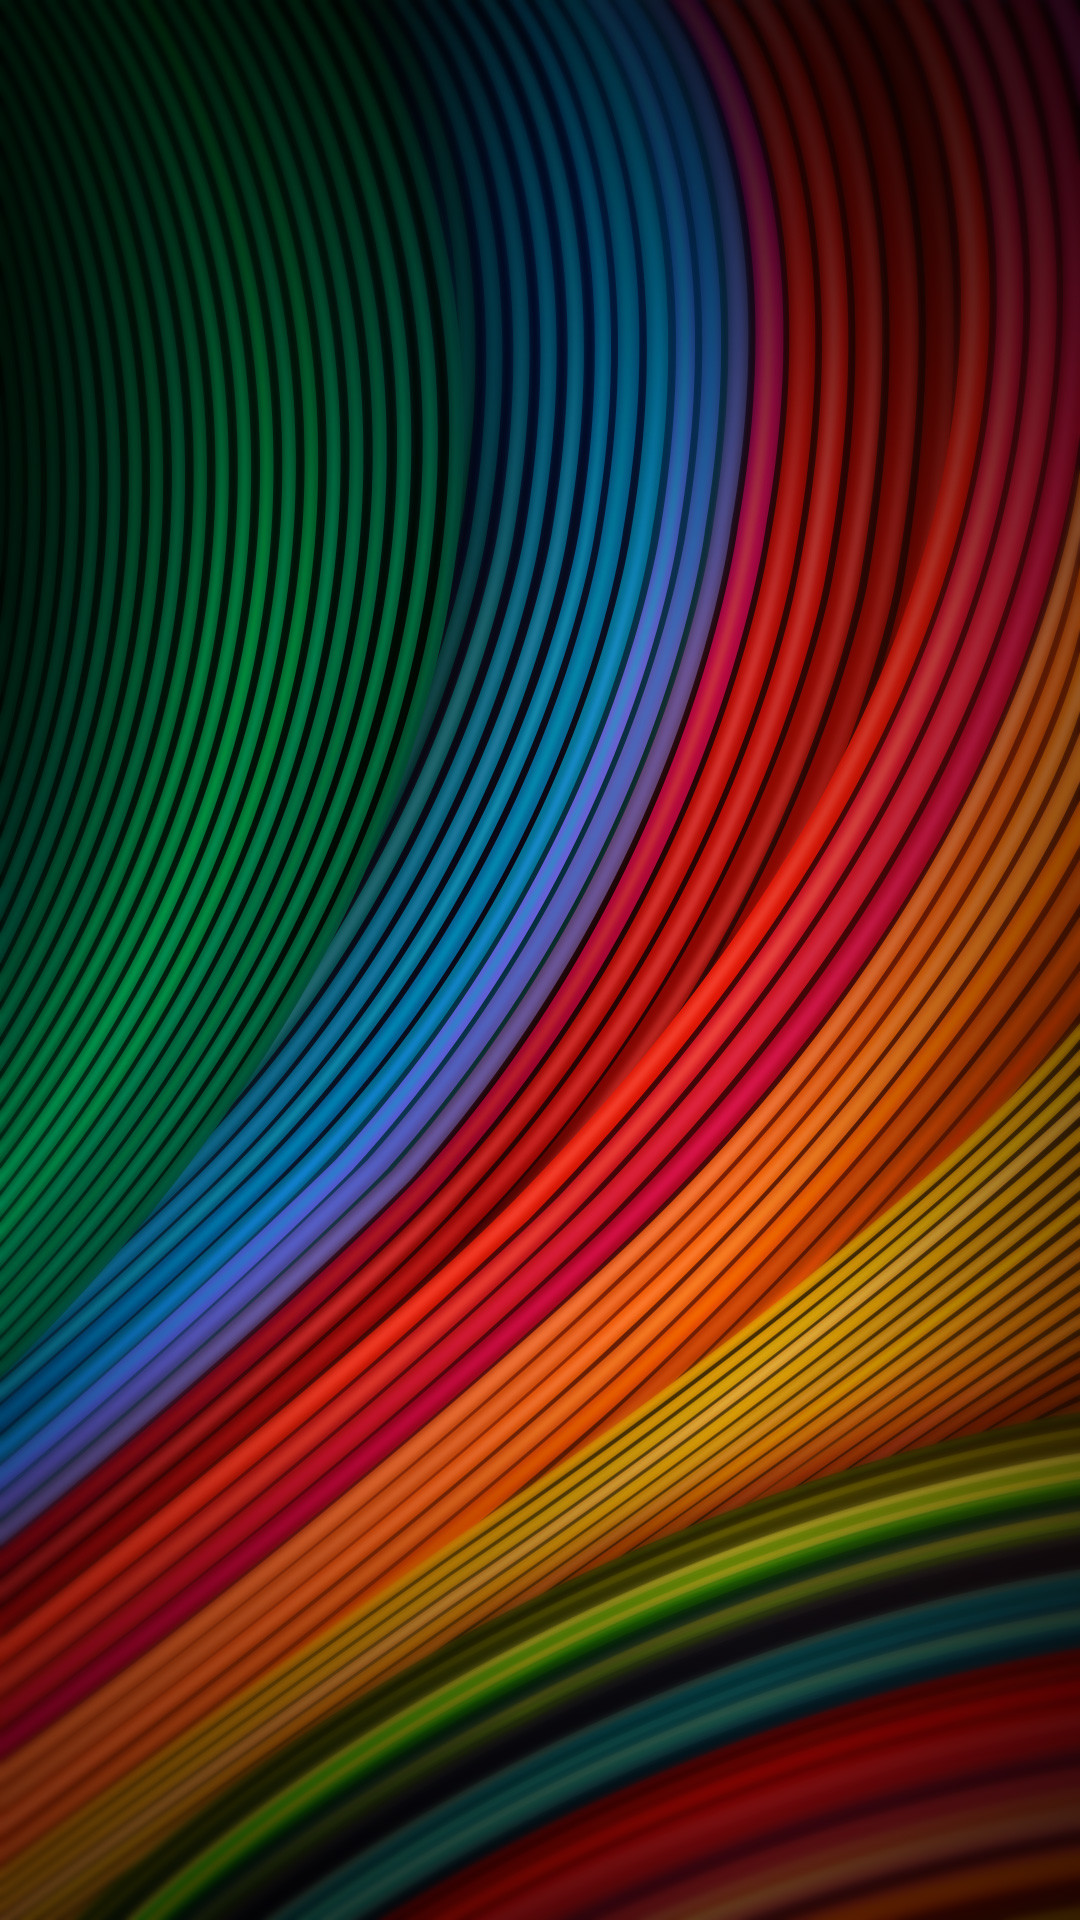 1080x1920 Rainbow Lines.Tap to see more iPhone & Android wallpapers, backgrounds,  fondos!